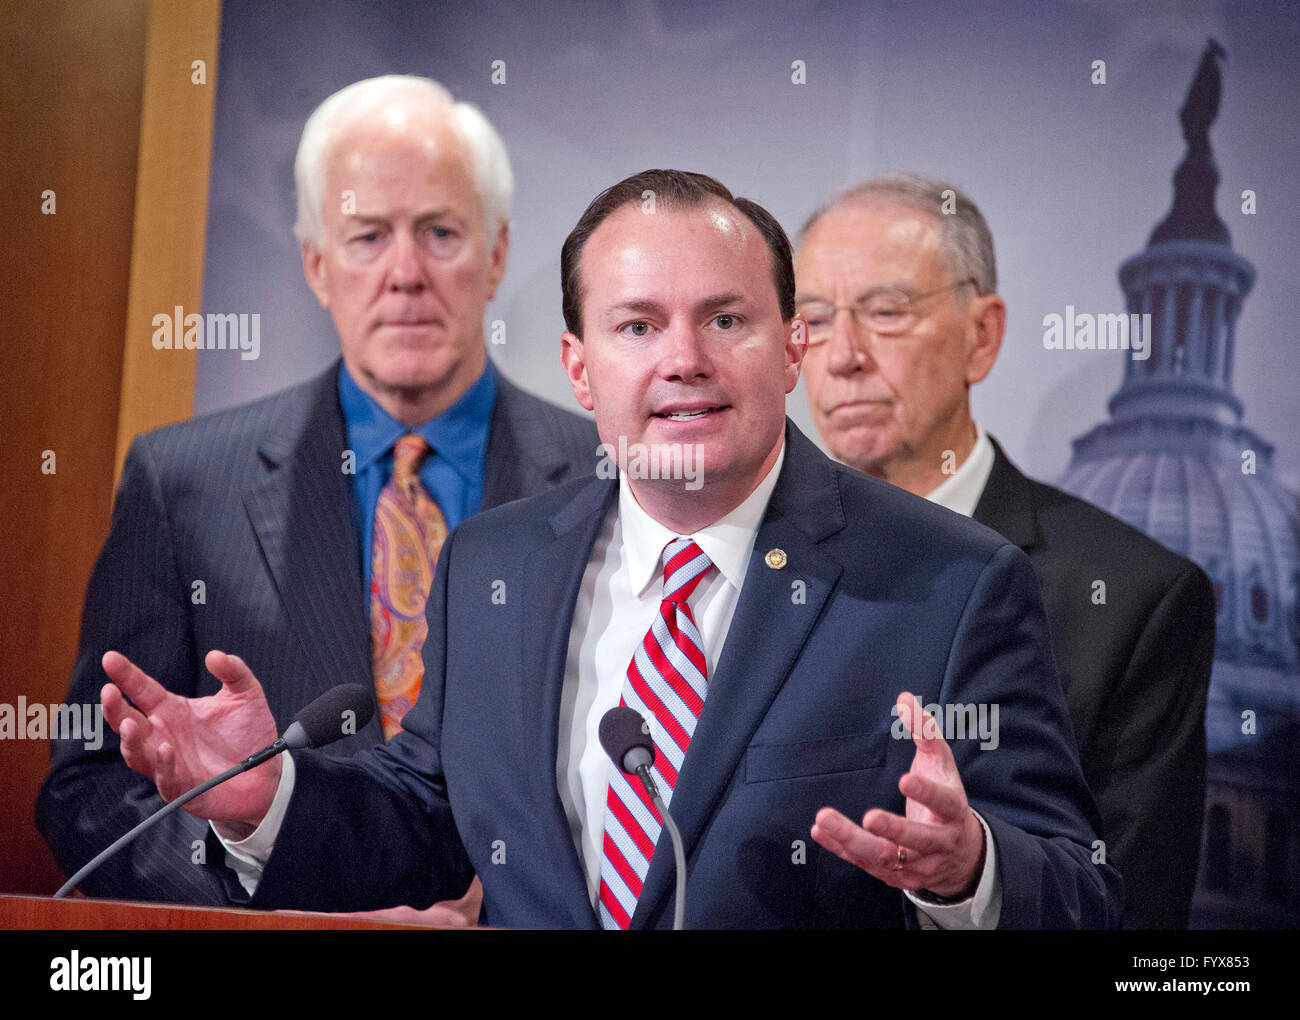 United States Senator Mike Lee (Republican of Utah) makes remarks during a press conference calling on the US Senate Republican leadership to bring to the floor the bipartisan Sentencing Reform and Corrections Act, a bill to reduce some mandatory minimum sentences and apply those changes retroactively to inmates currently serving unfair sentences. Standing behind Sen. Lee are US Senator John Cornyn (Republican of Texas), left, and US Senator Chuck Grassley (Republican of Iowa), right. Credit: Ron Sachs/CNP - NO WIRE SERVICE - Stock Photo